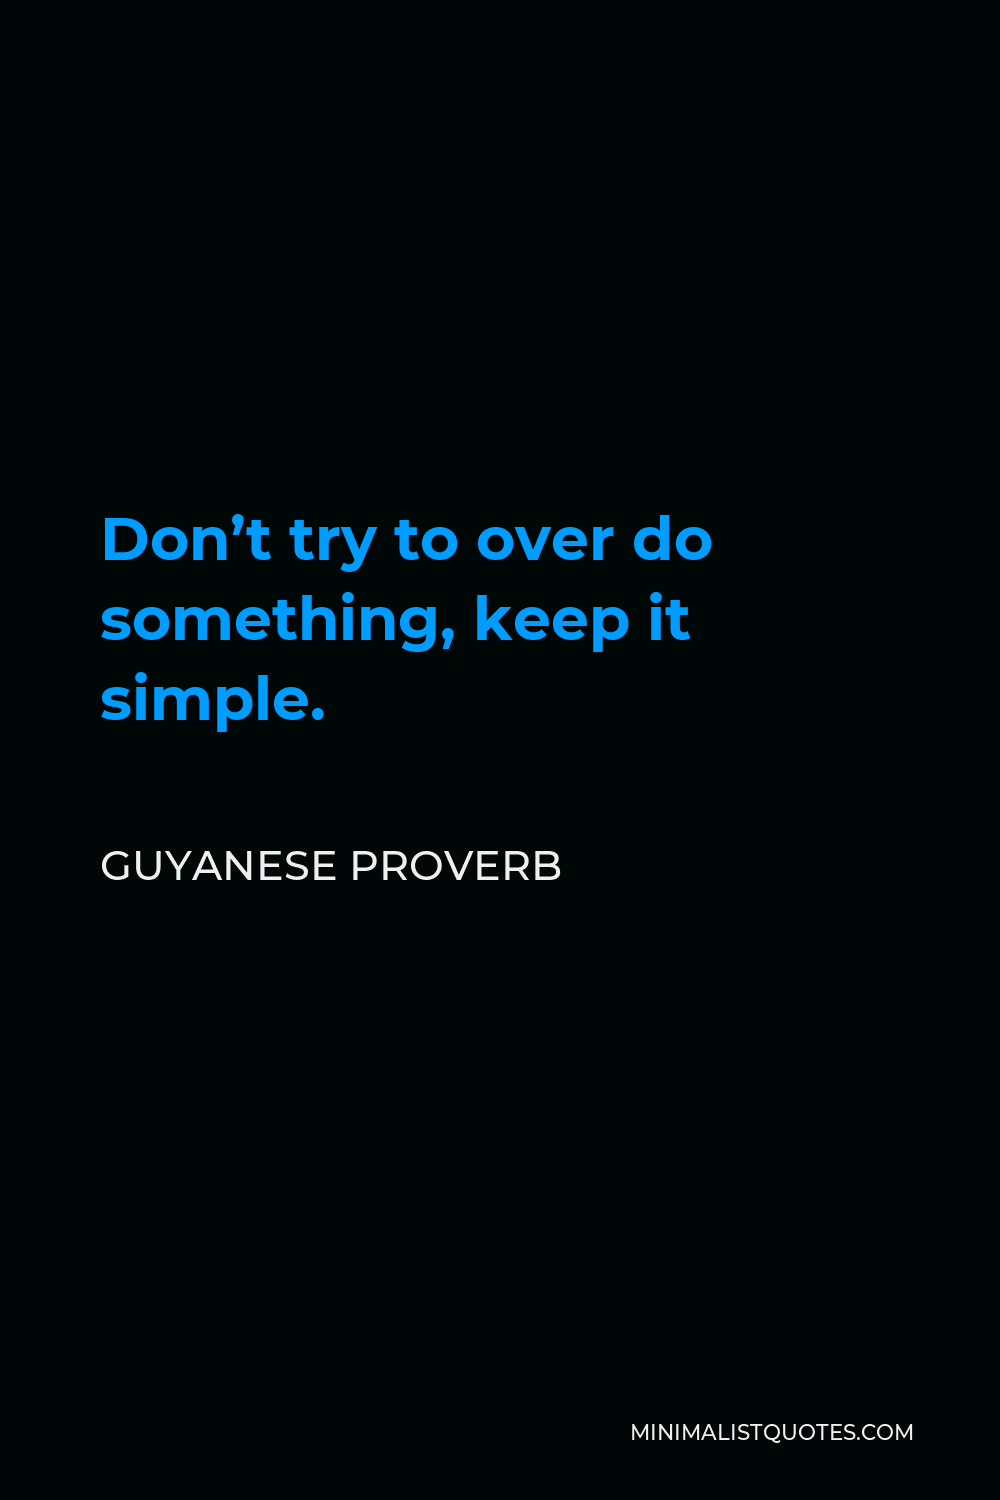 Guyanese Proverb Quote - Don’t try to over do something, keep it simple.